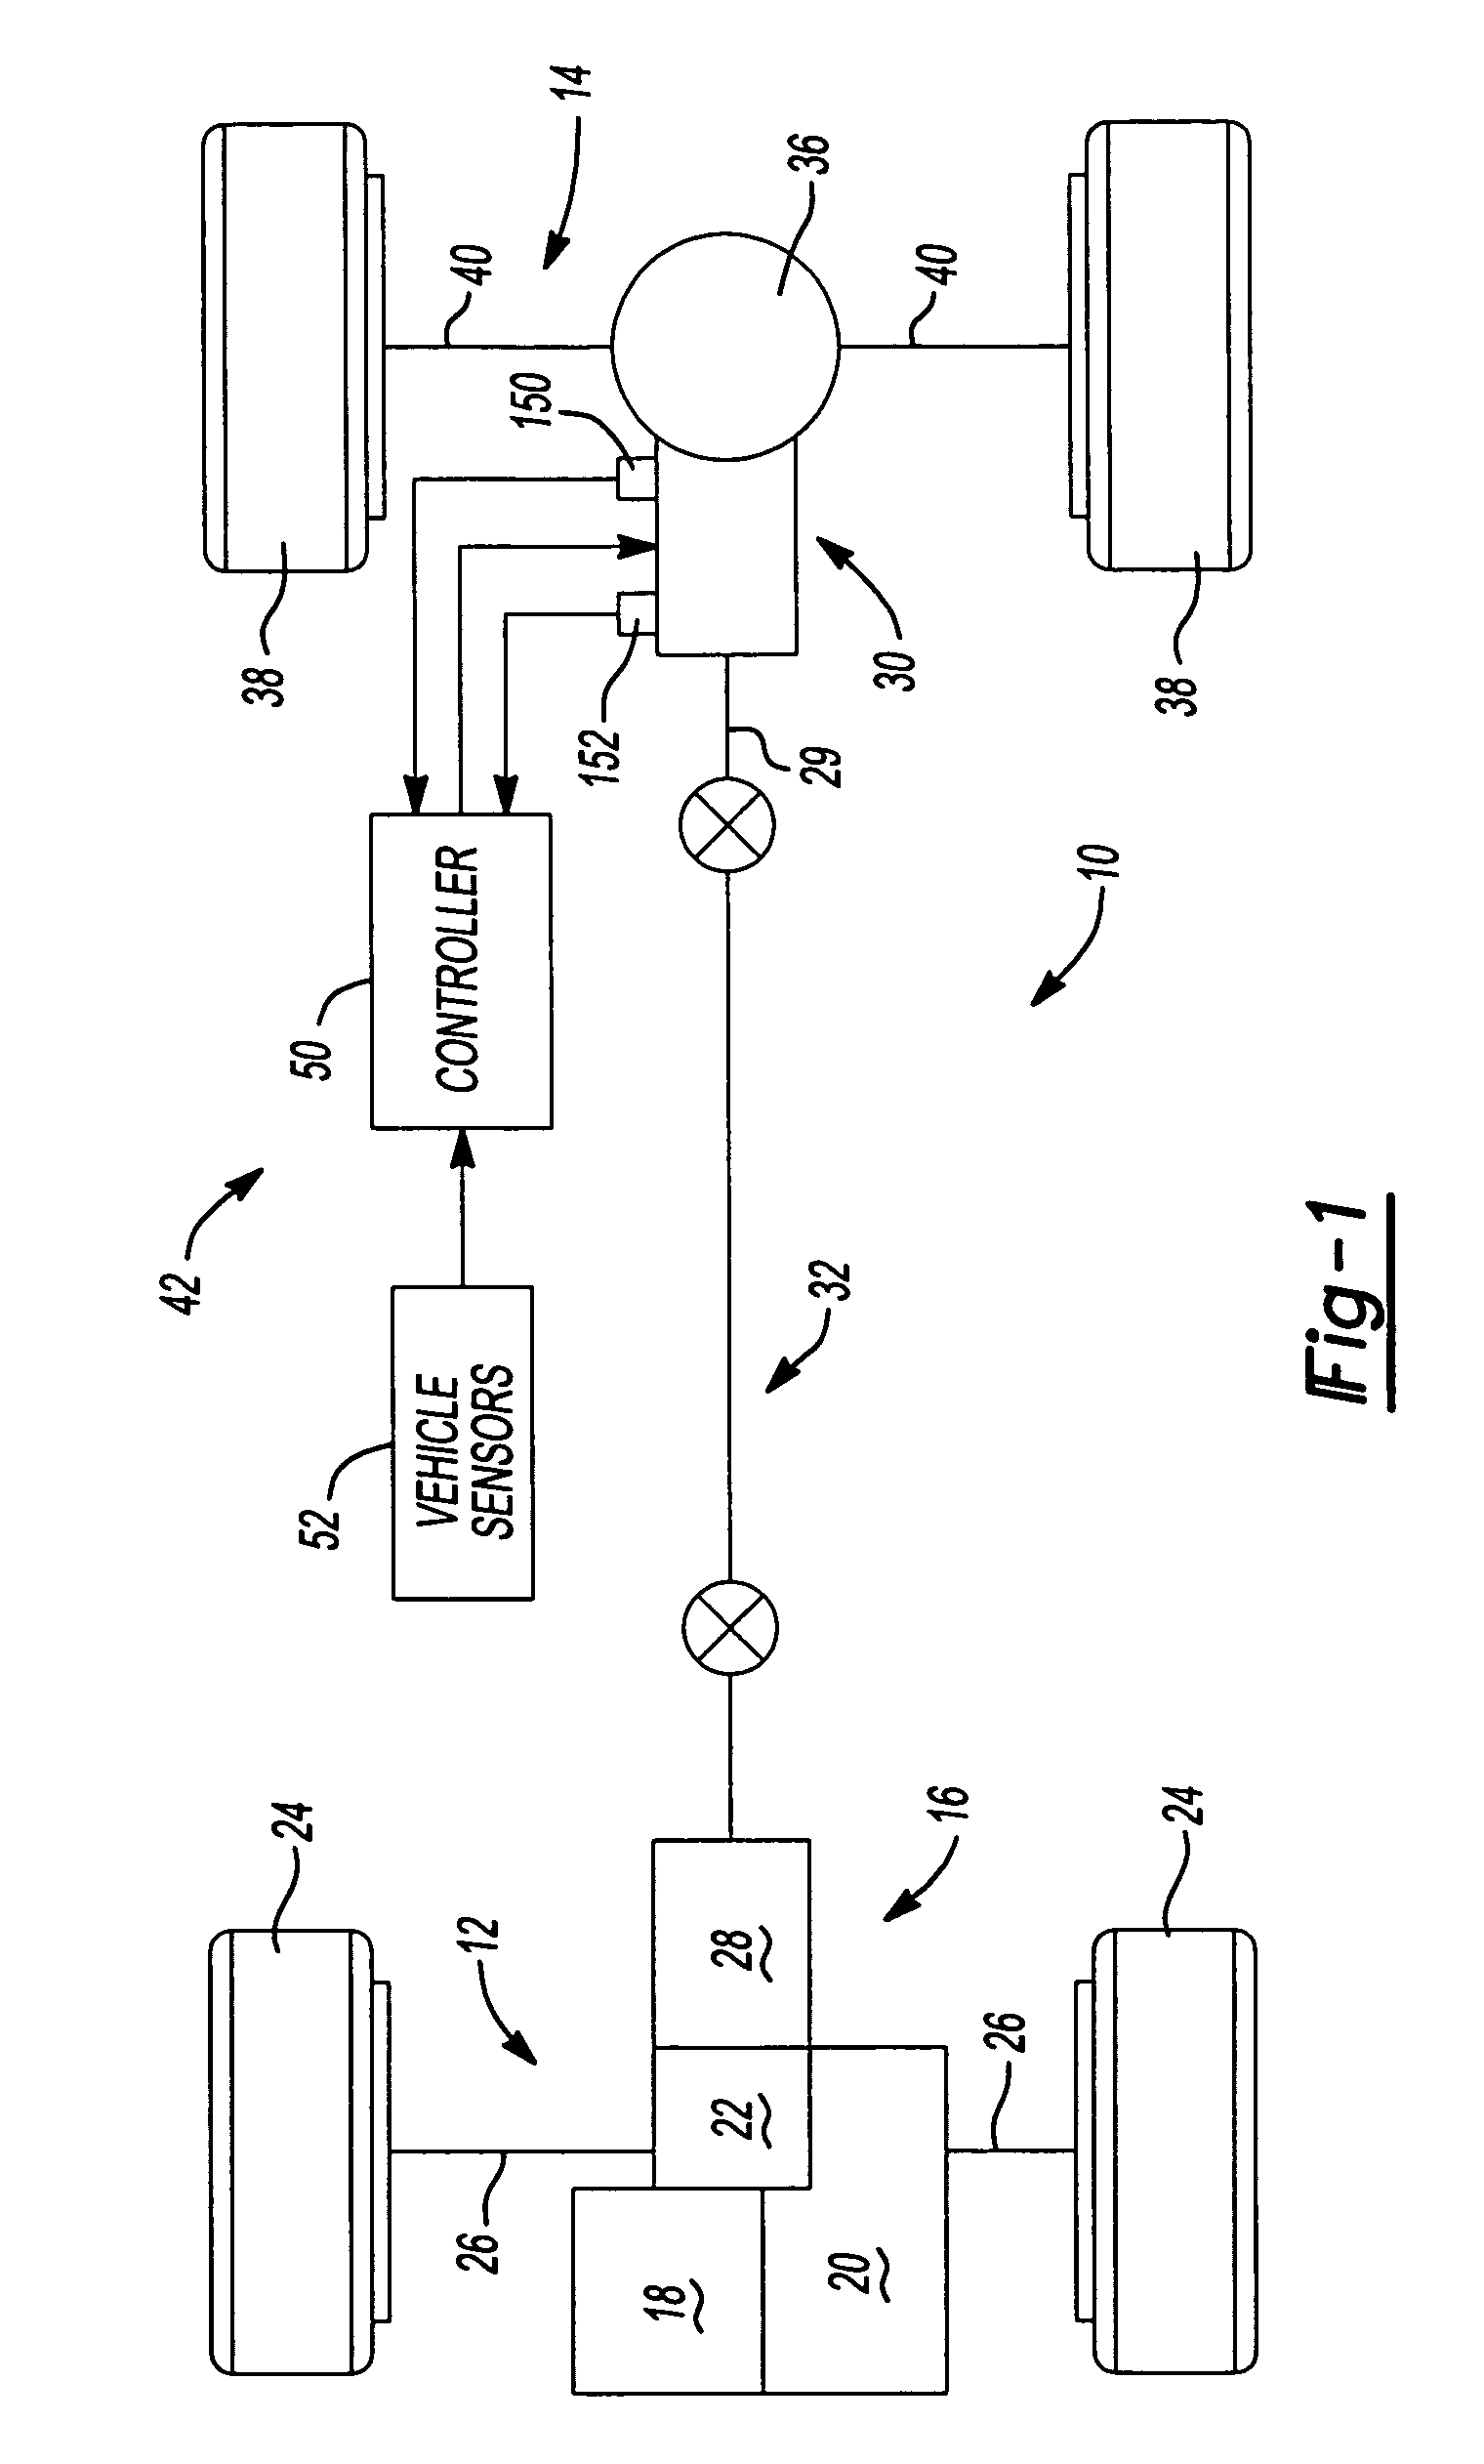 Electronically-controlled hydraulically-actuated coupling